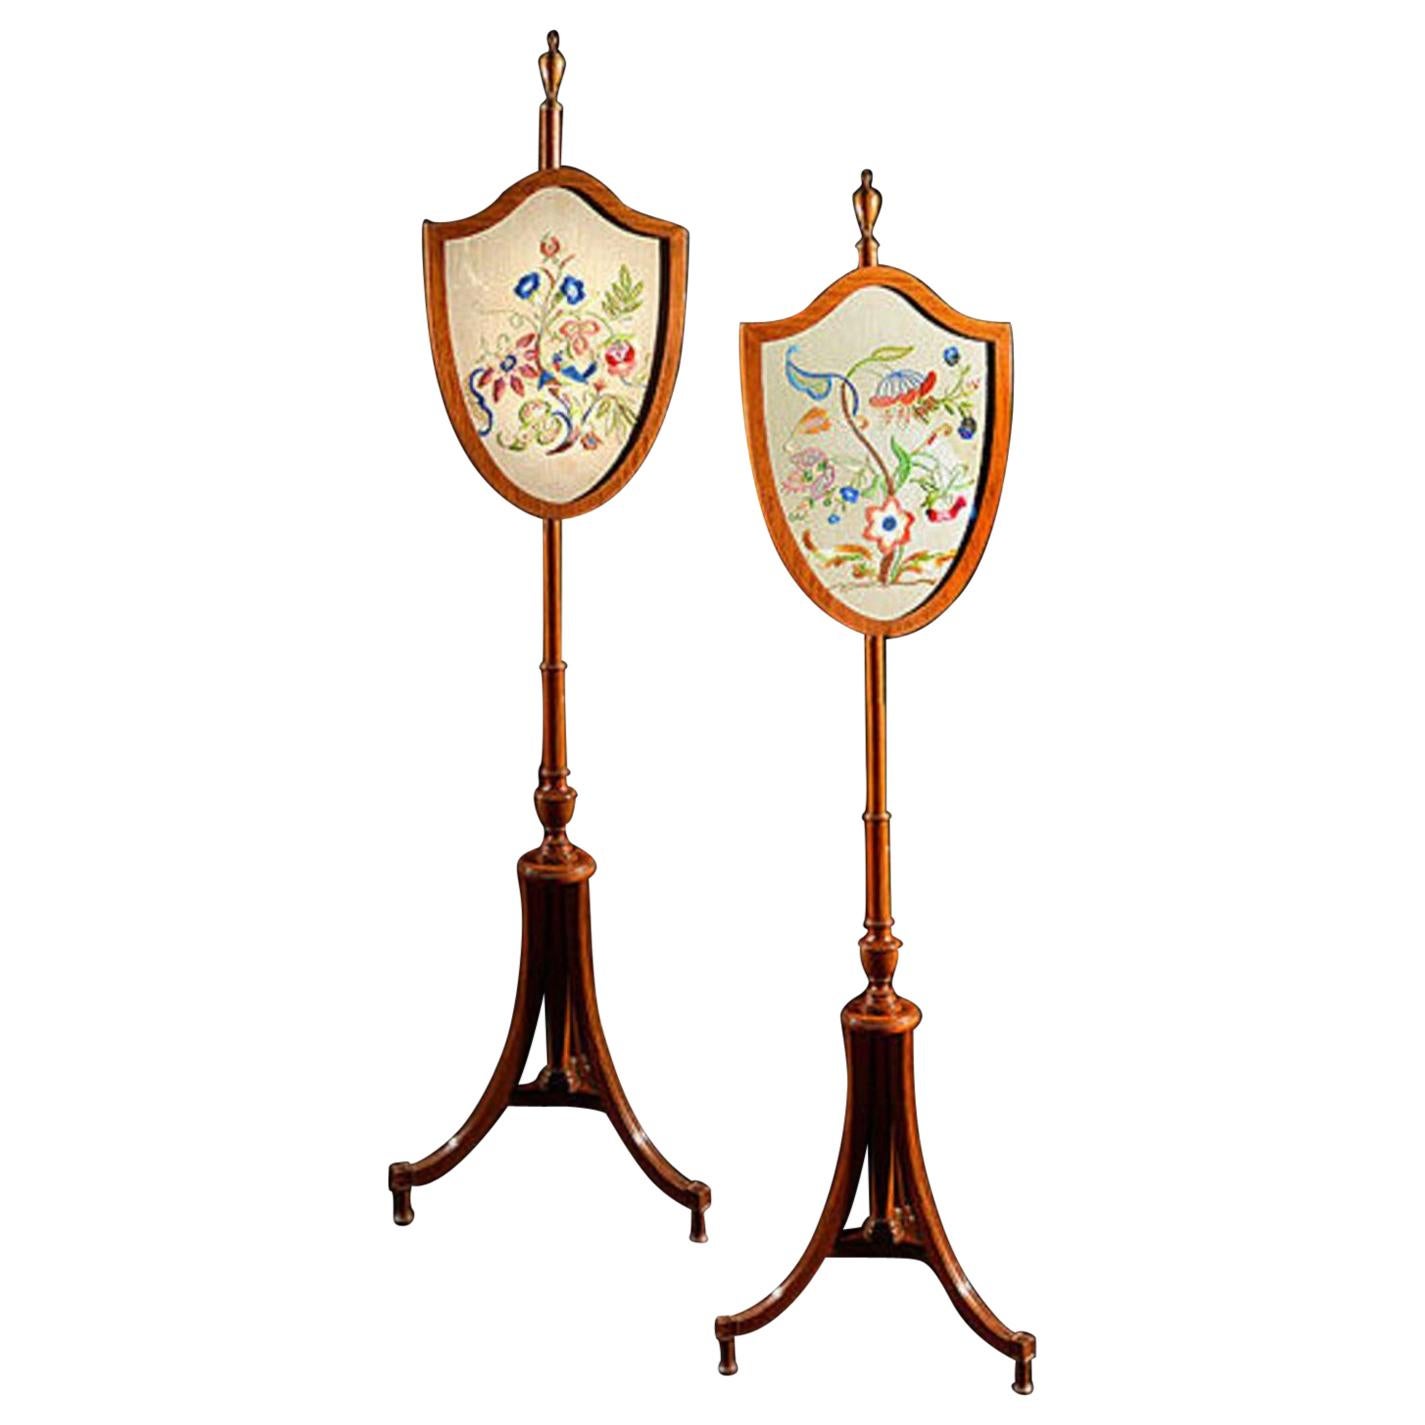 Pair of Mid-19th Century Satinwood Pole Screens For Sale